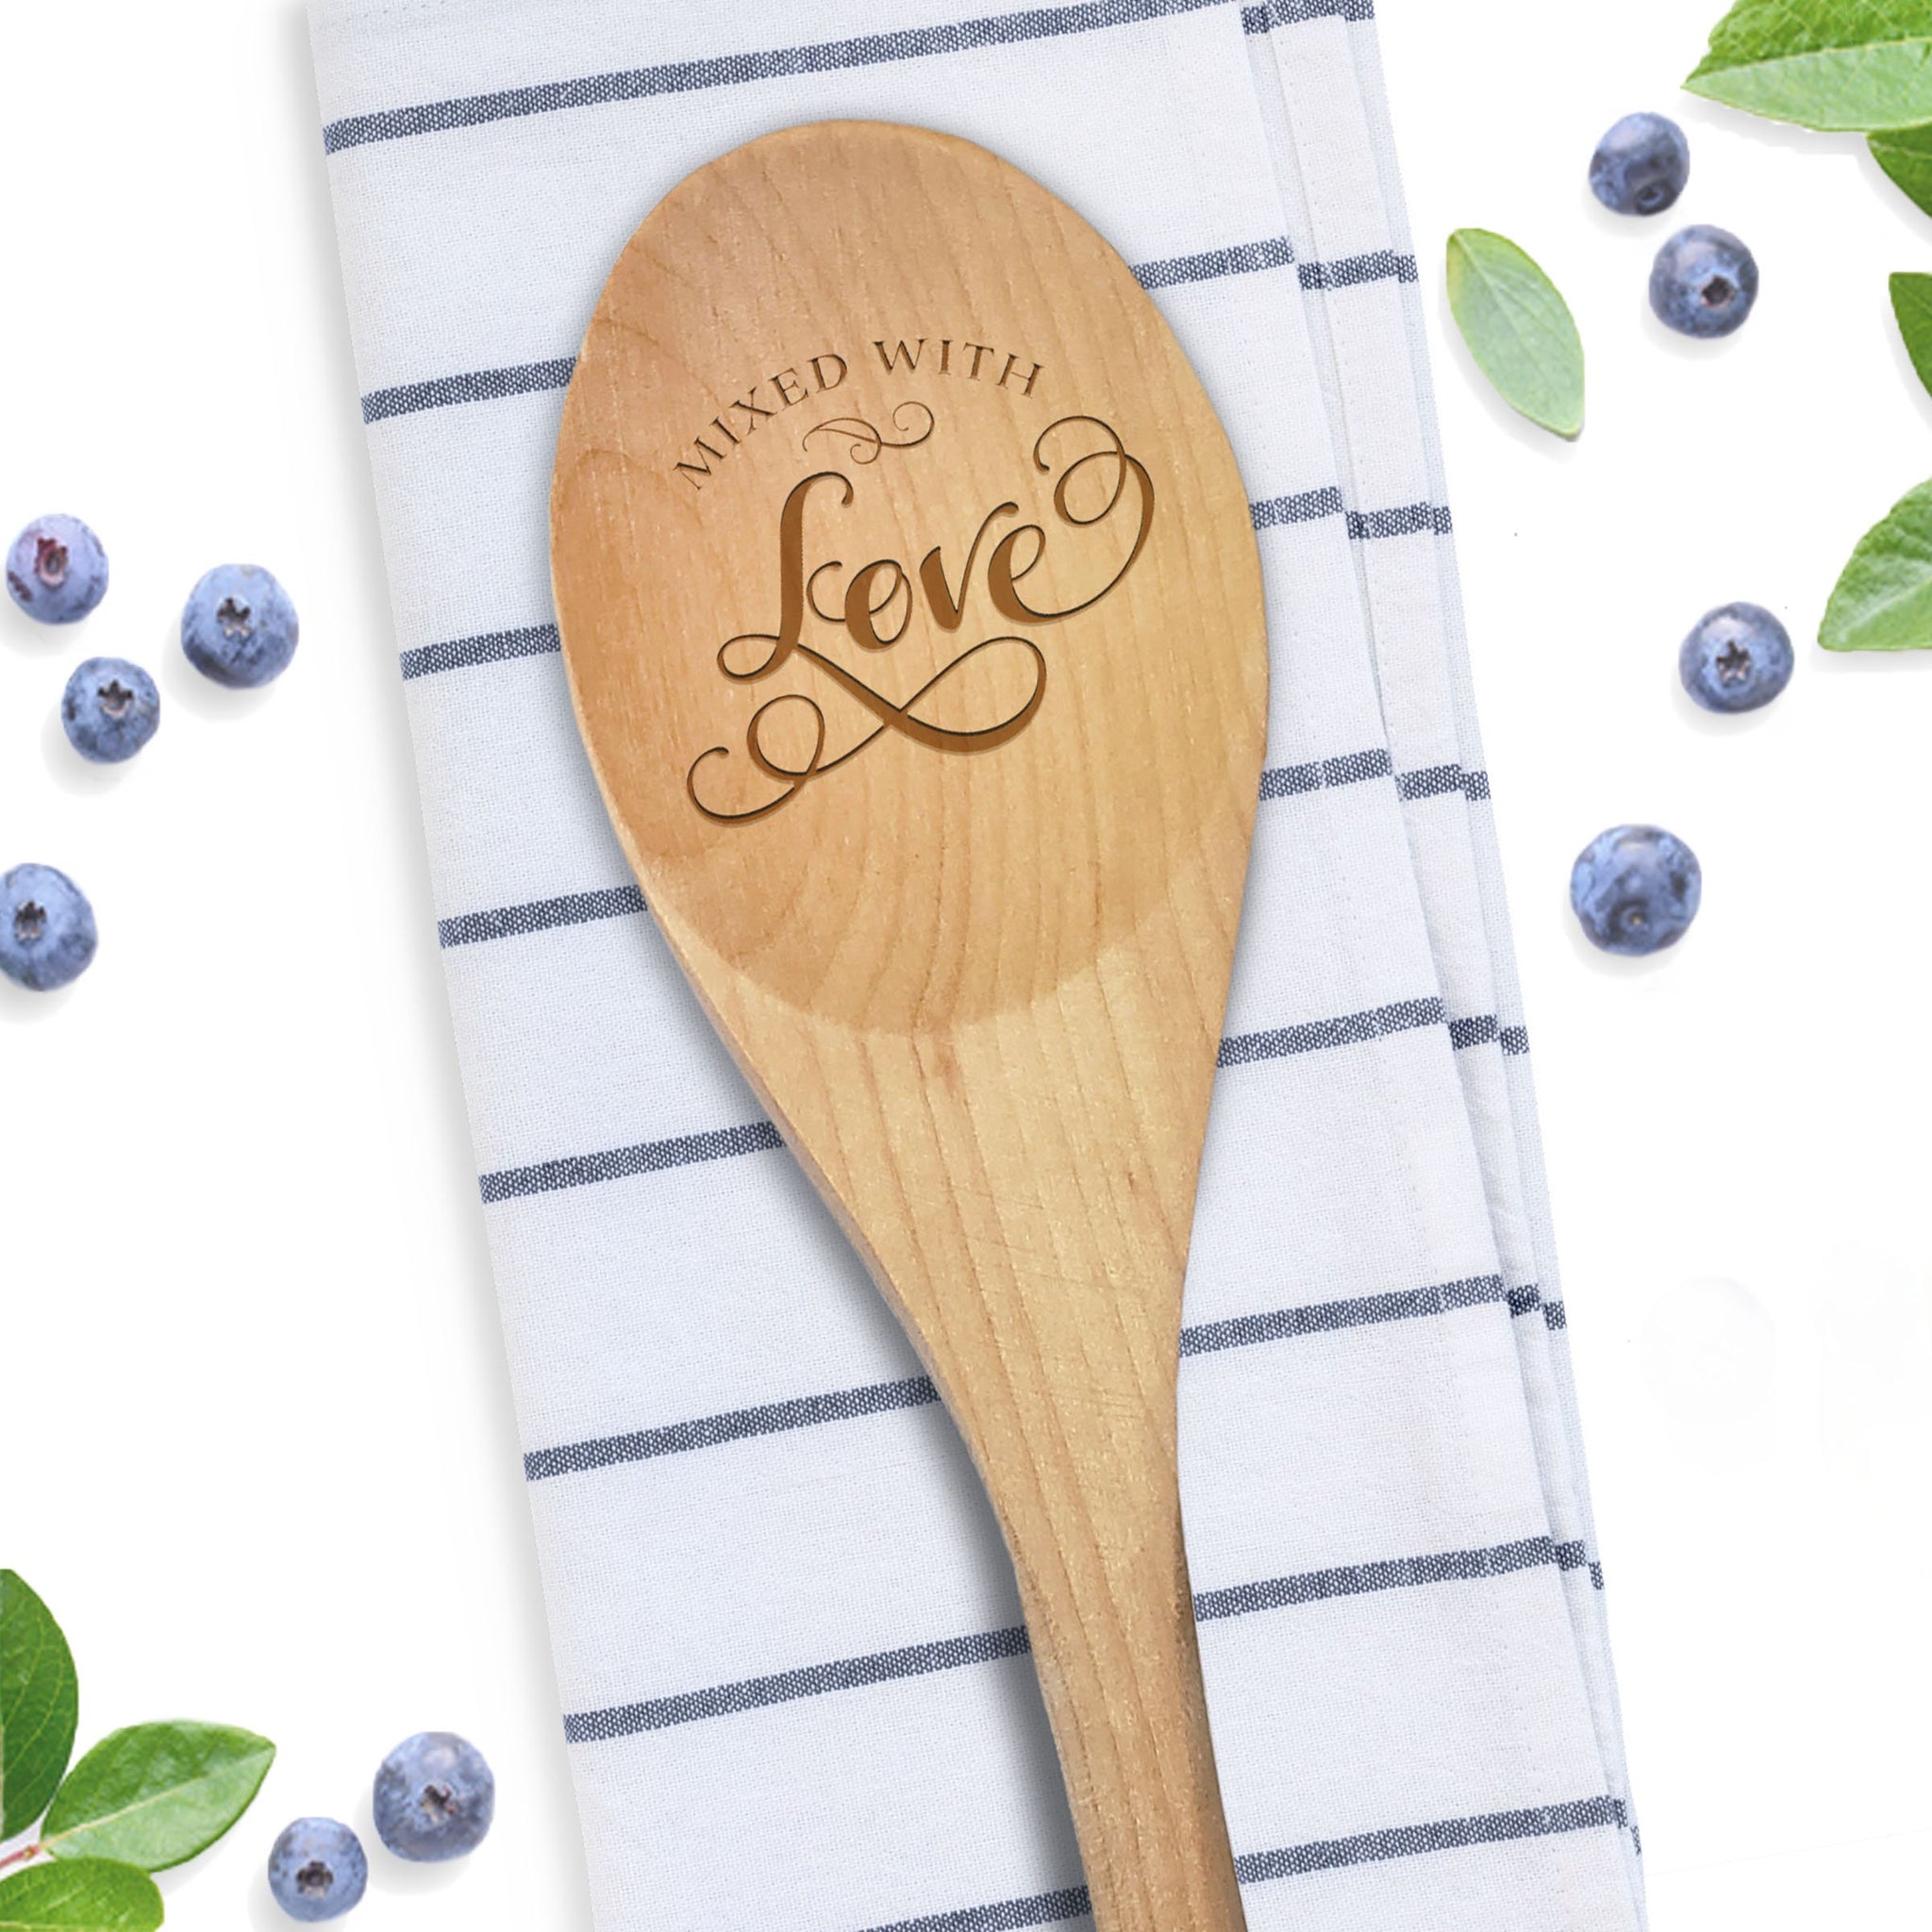 Personalized Utensil Holder Kitchen Gifts Personalized Wood Utensil Box  Bamboo Utensil Box Housewarming Gift for Couples 